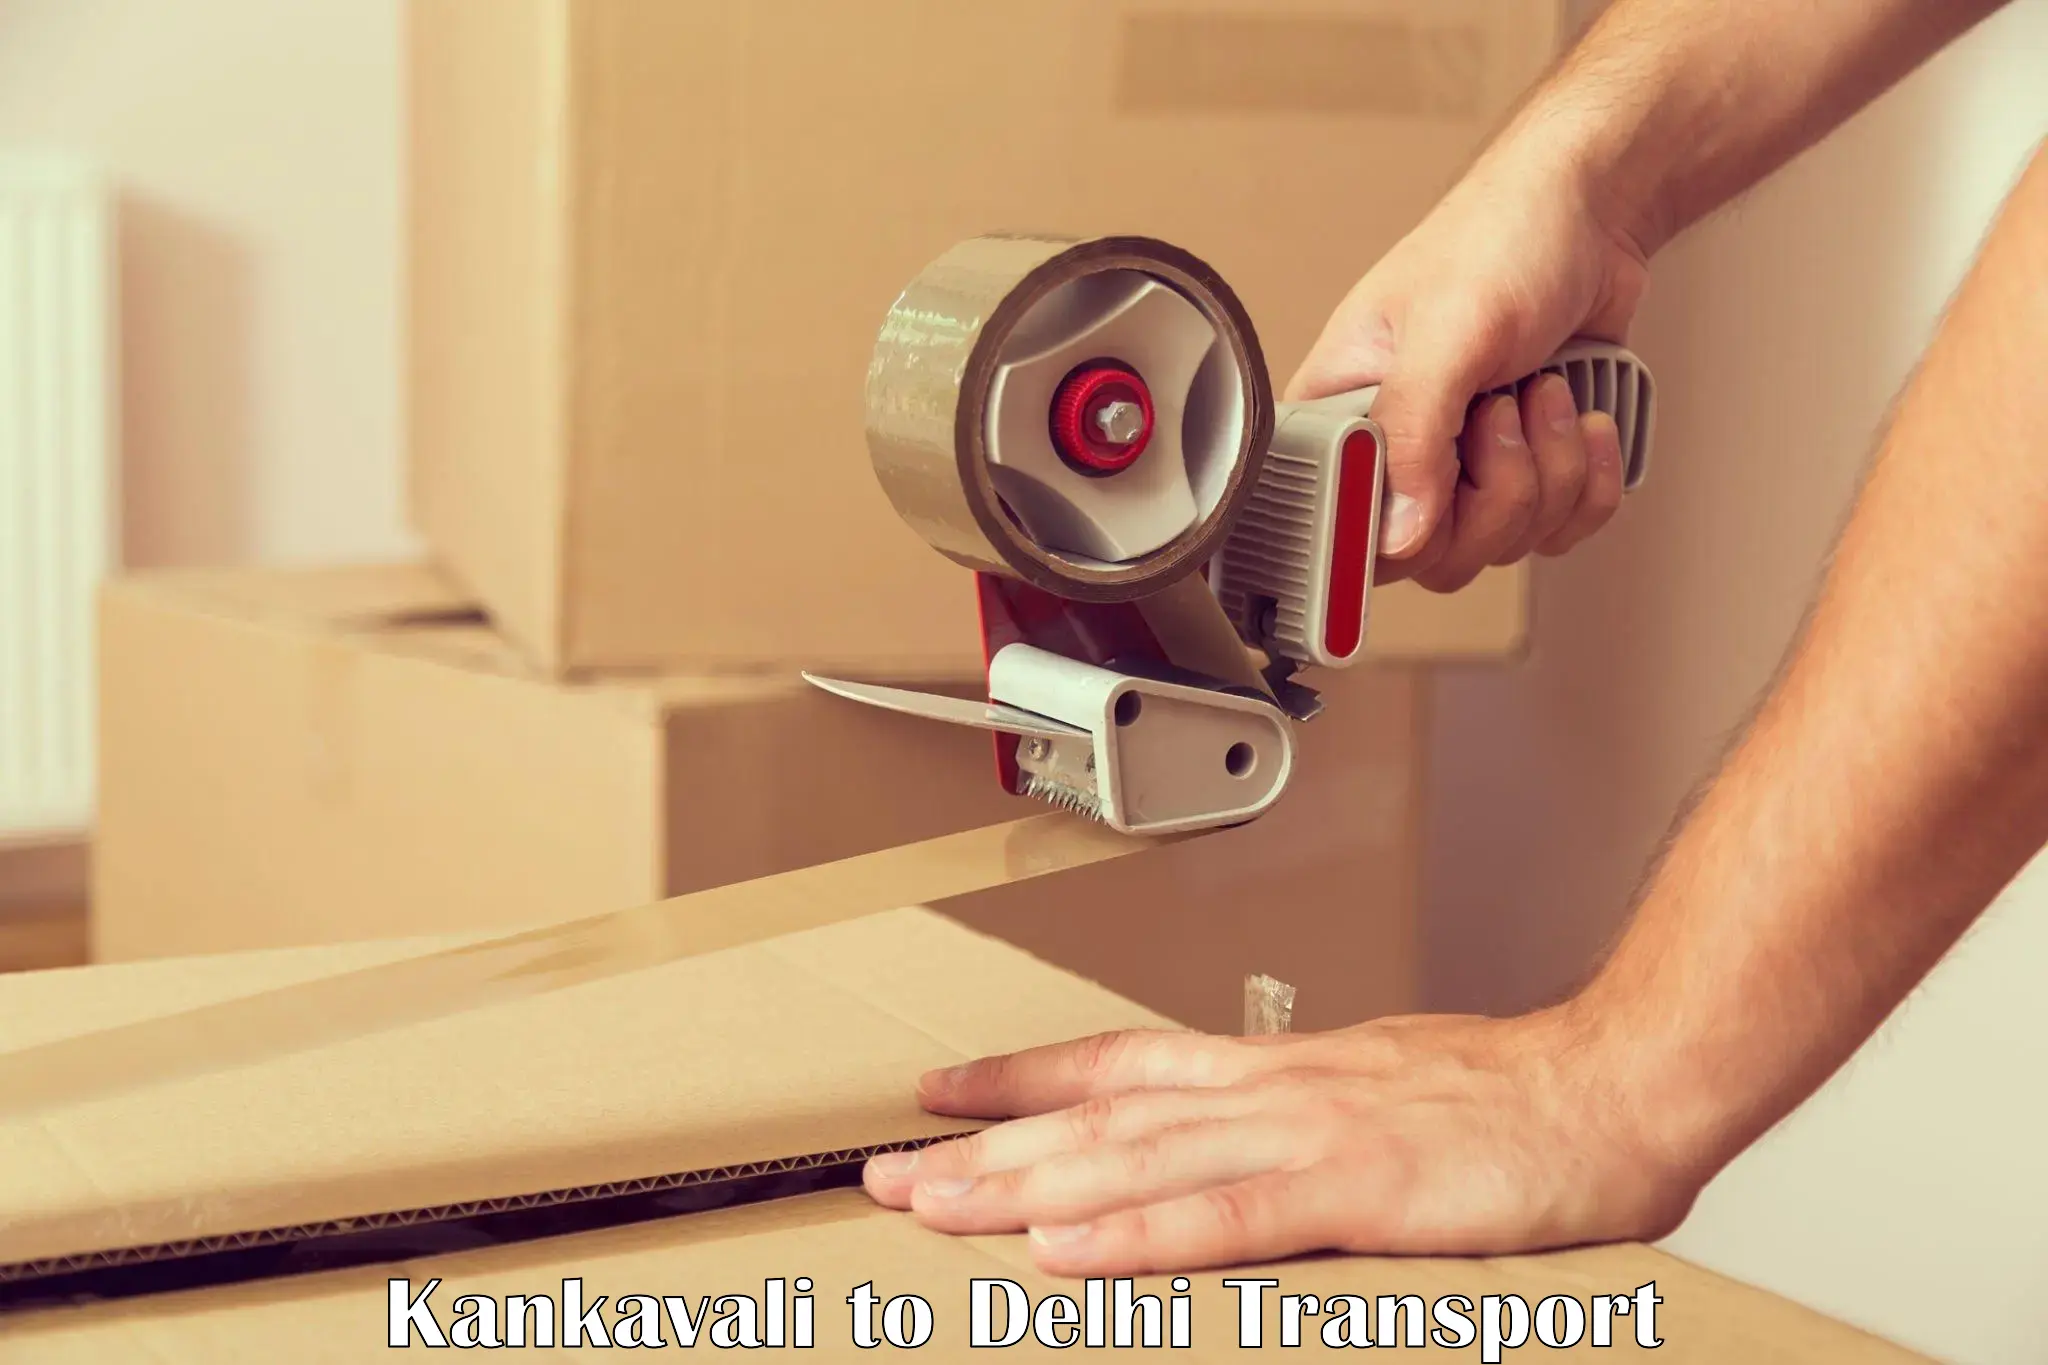 Domestic goods transportation services Kankavali to NCR